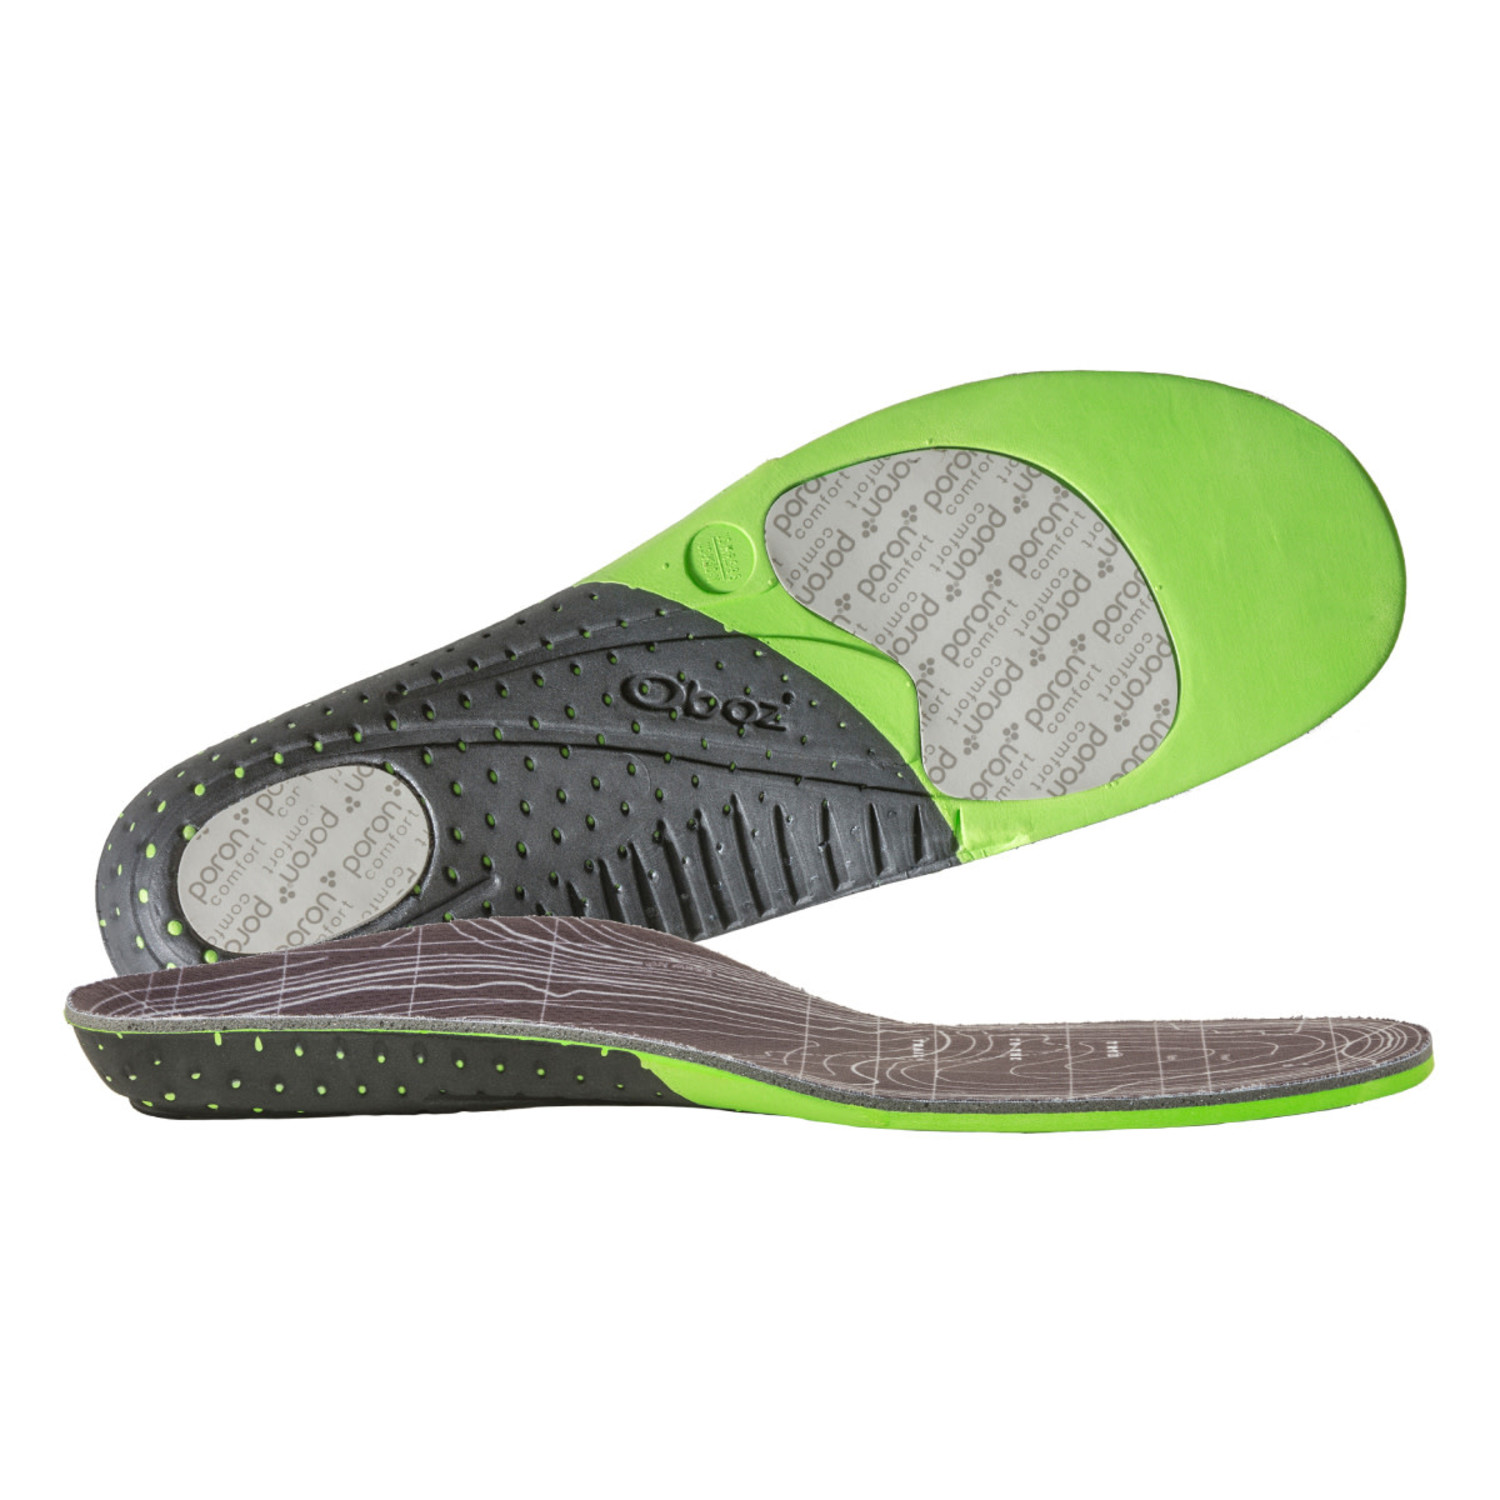 o fit insole